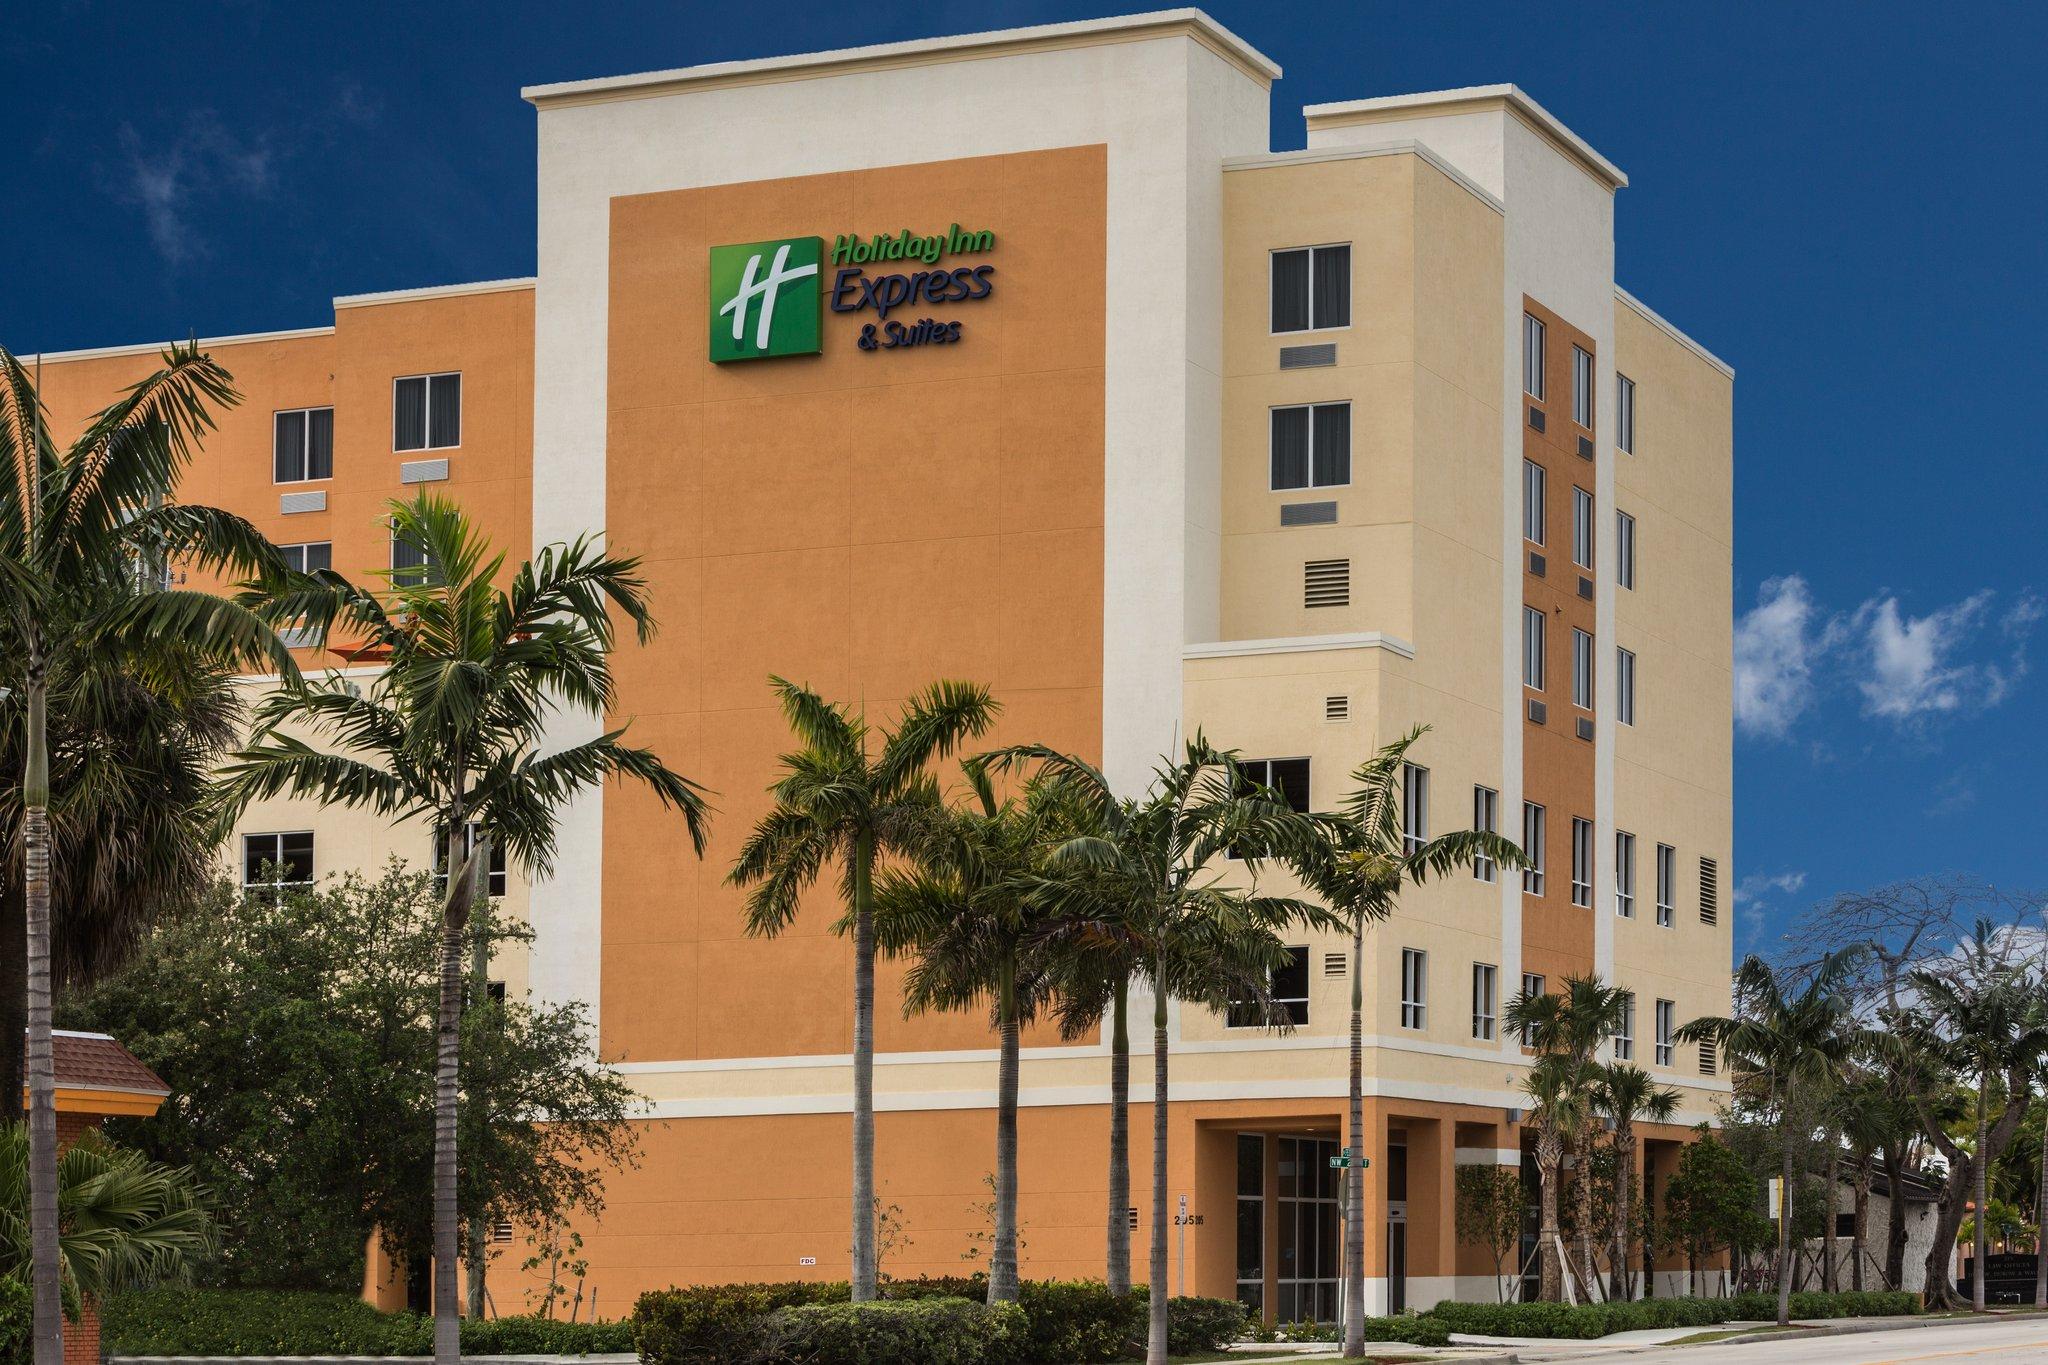 Holiday Inn Express Hotel & Suites Fort Lauderdale Airport South in Dania Beach, FL